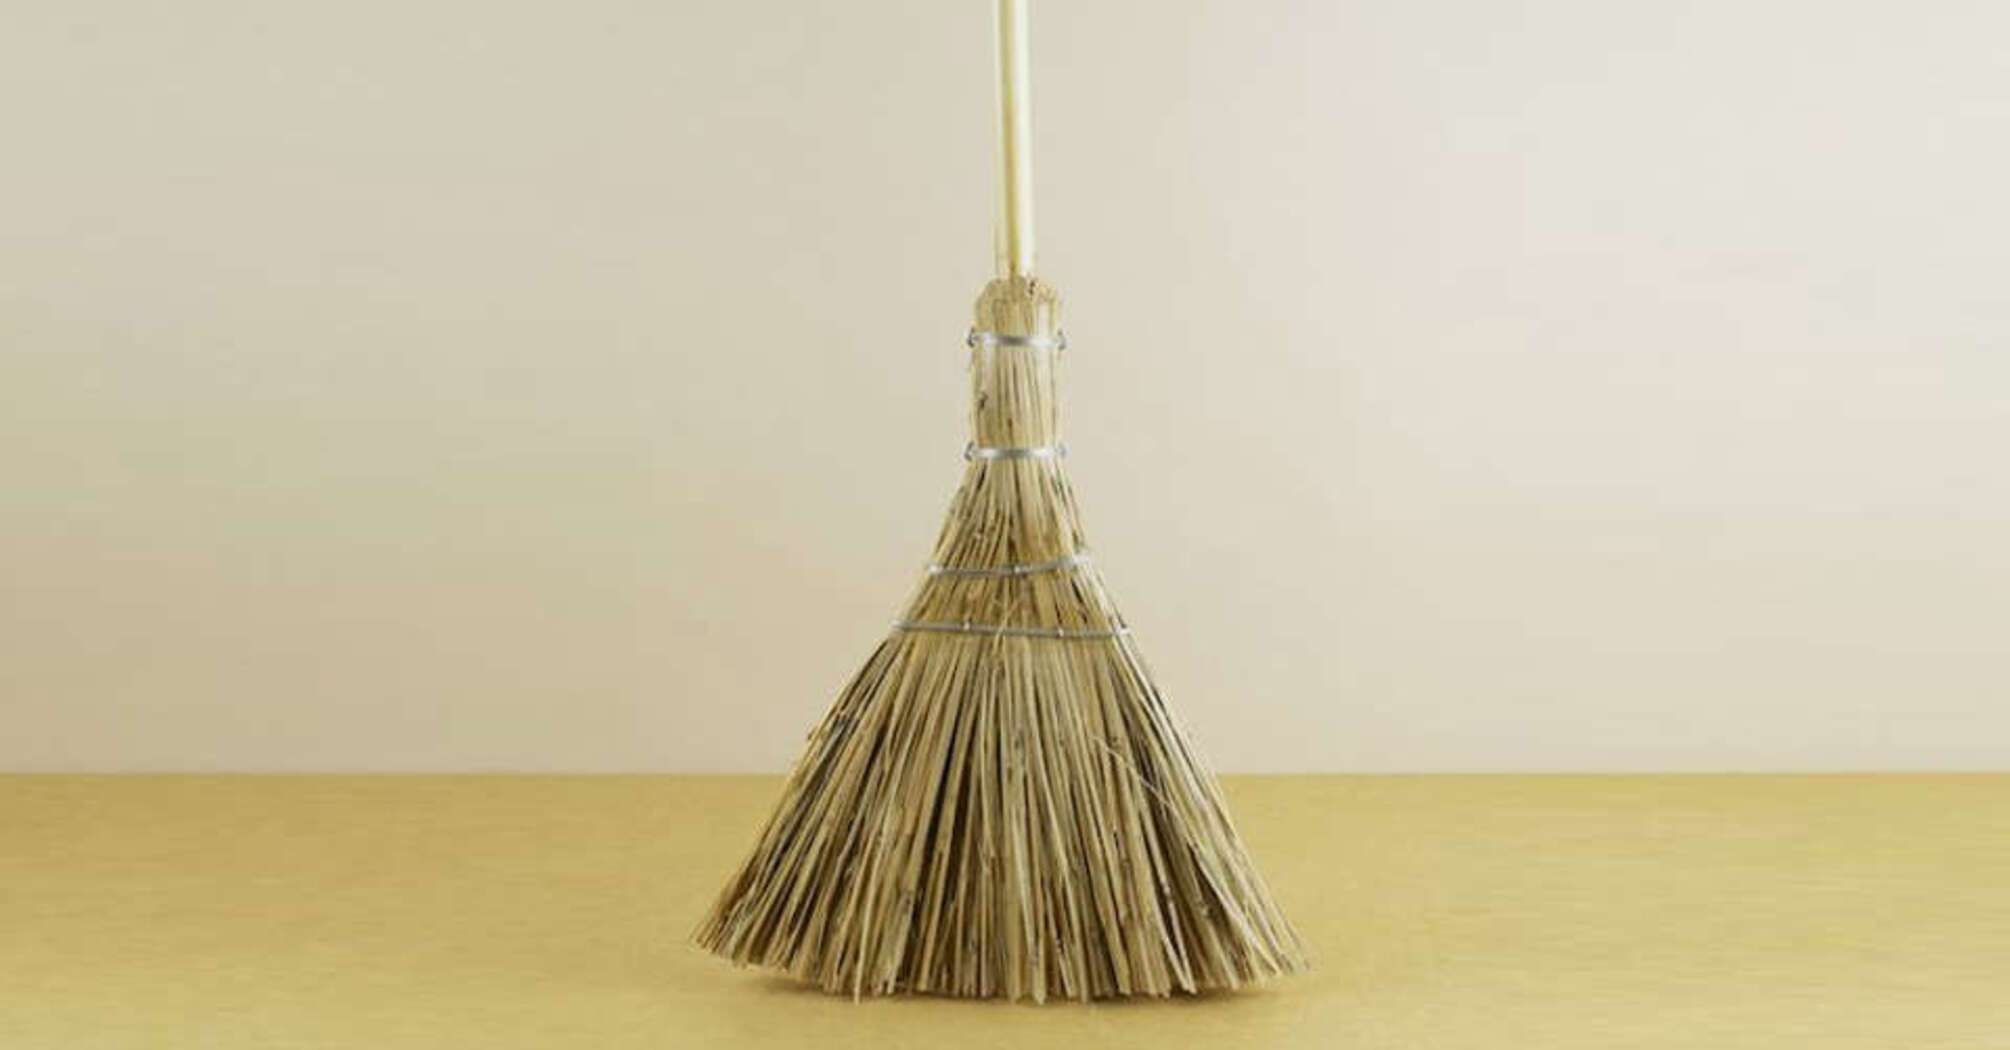 Broom Superstition in China: Cultural Beliefs and Practices